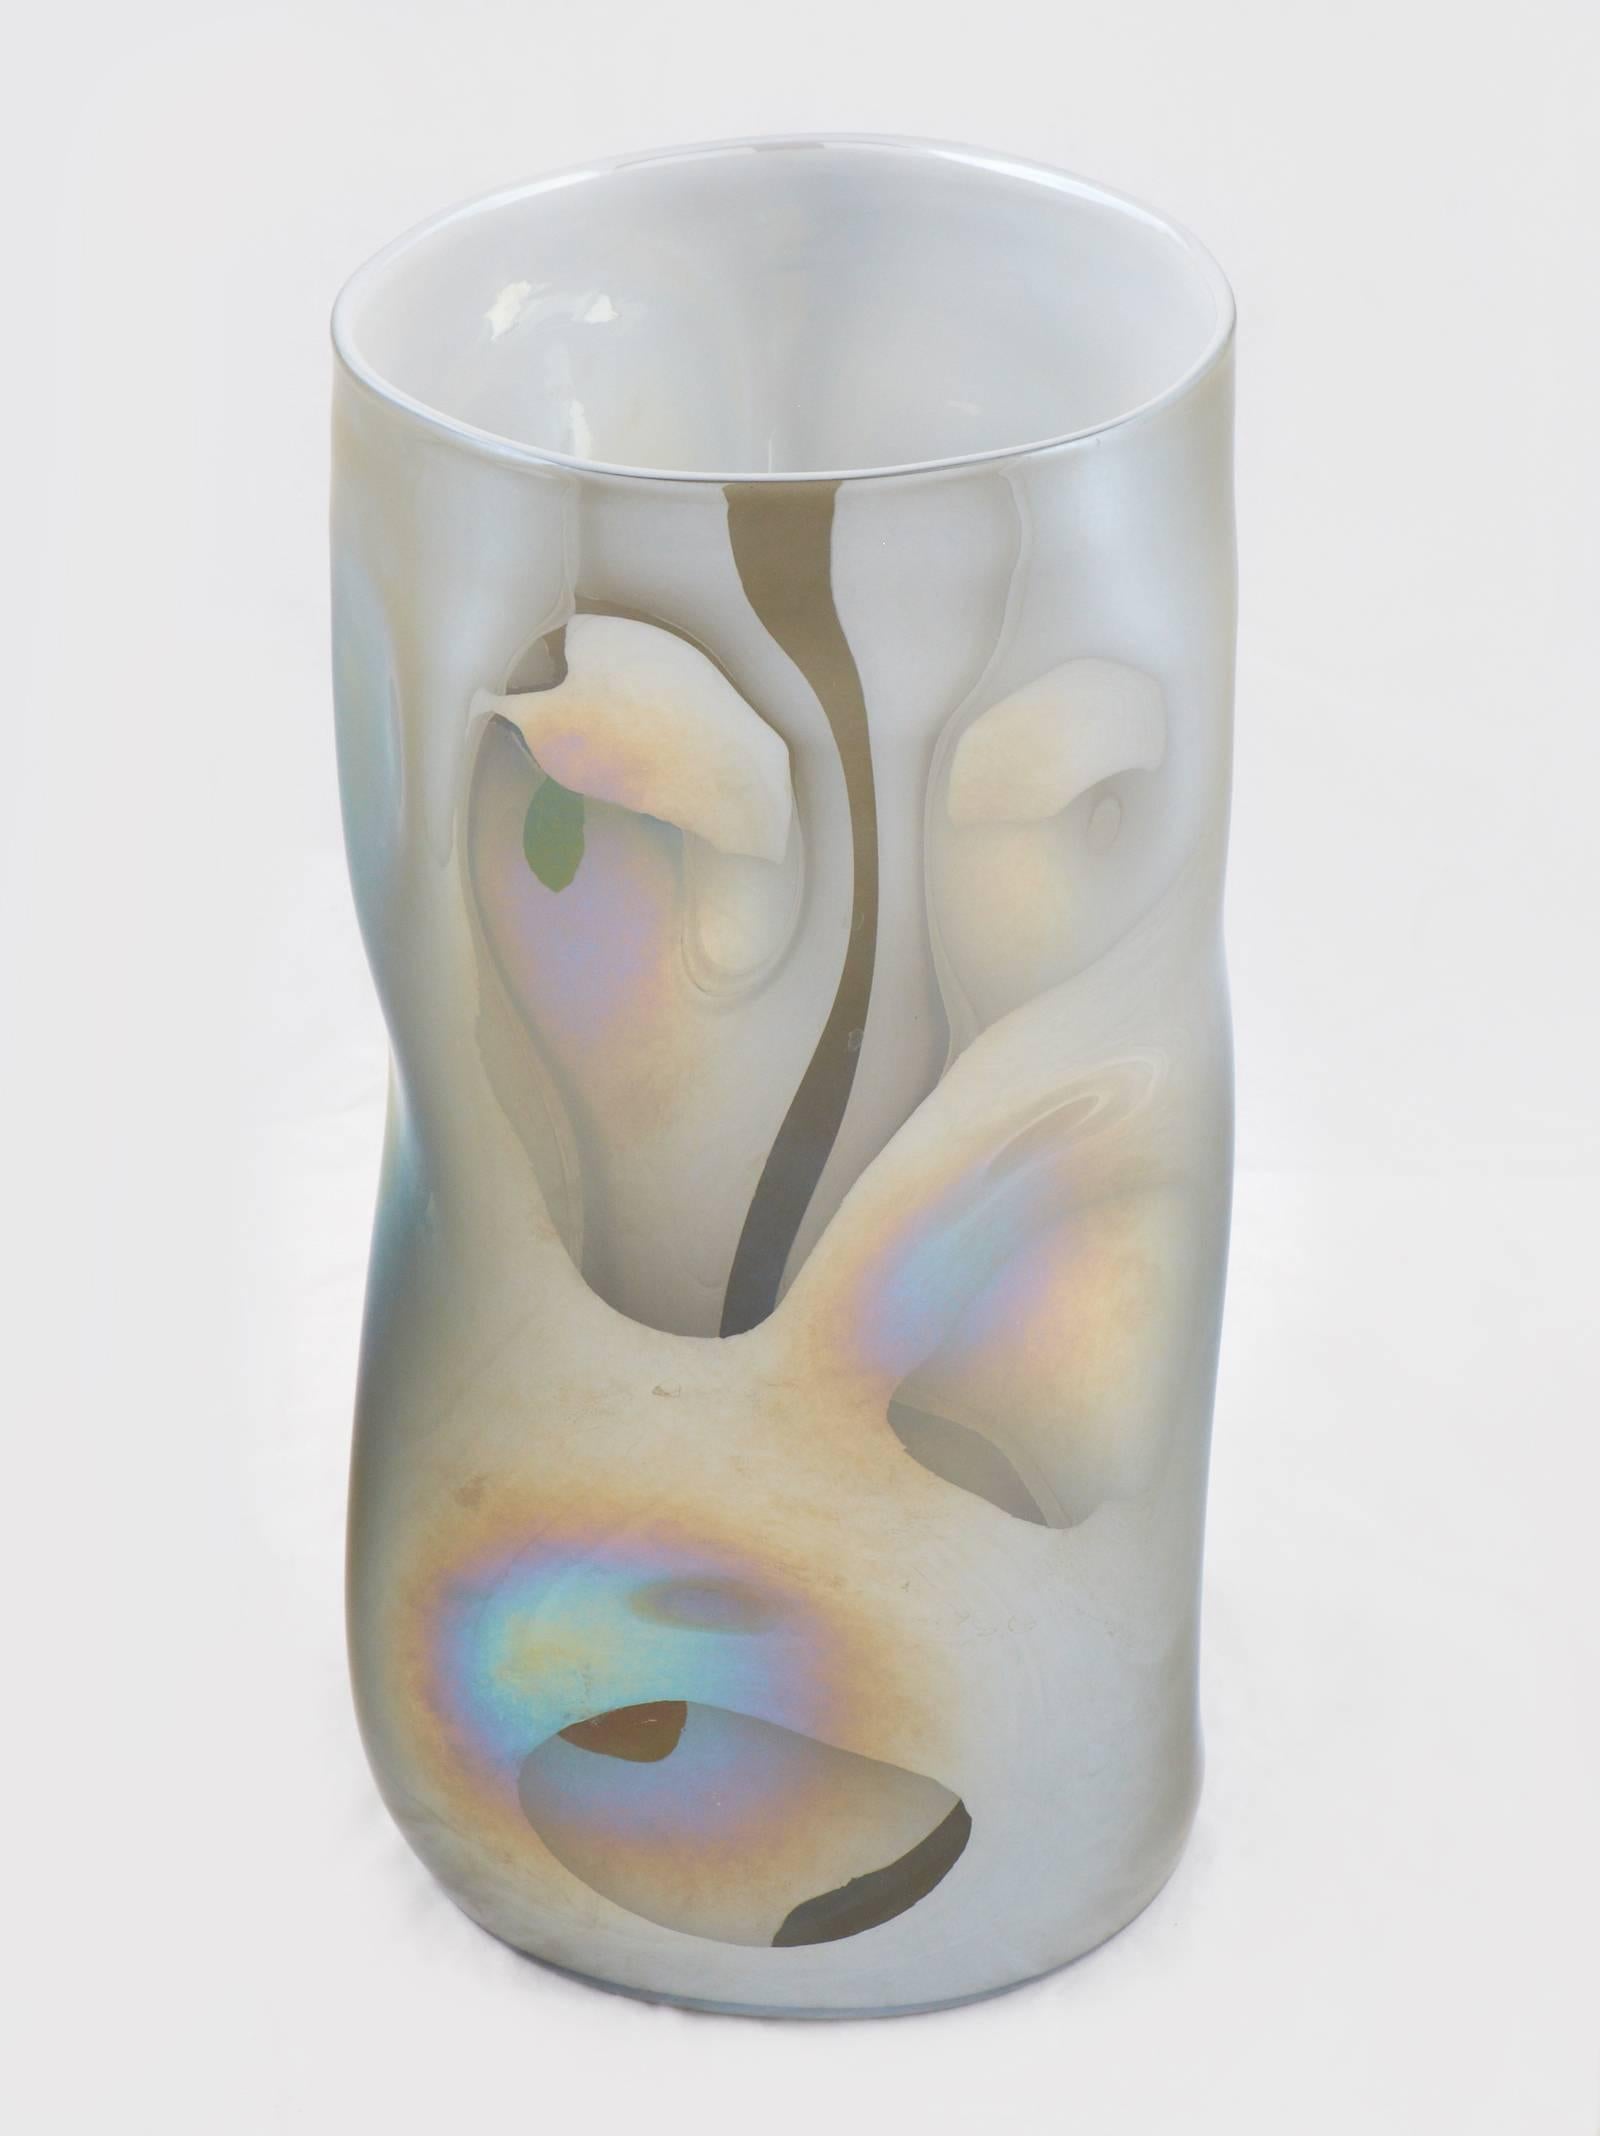 Sculptural Murano Iridescent Mirrored Glass Vases In Excellent Condition For Sale In Austin, TX